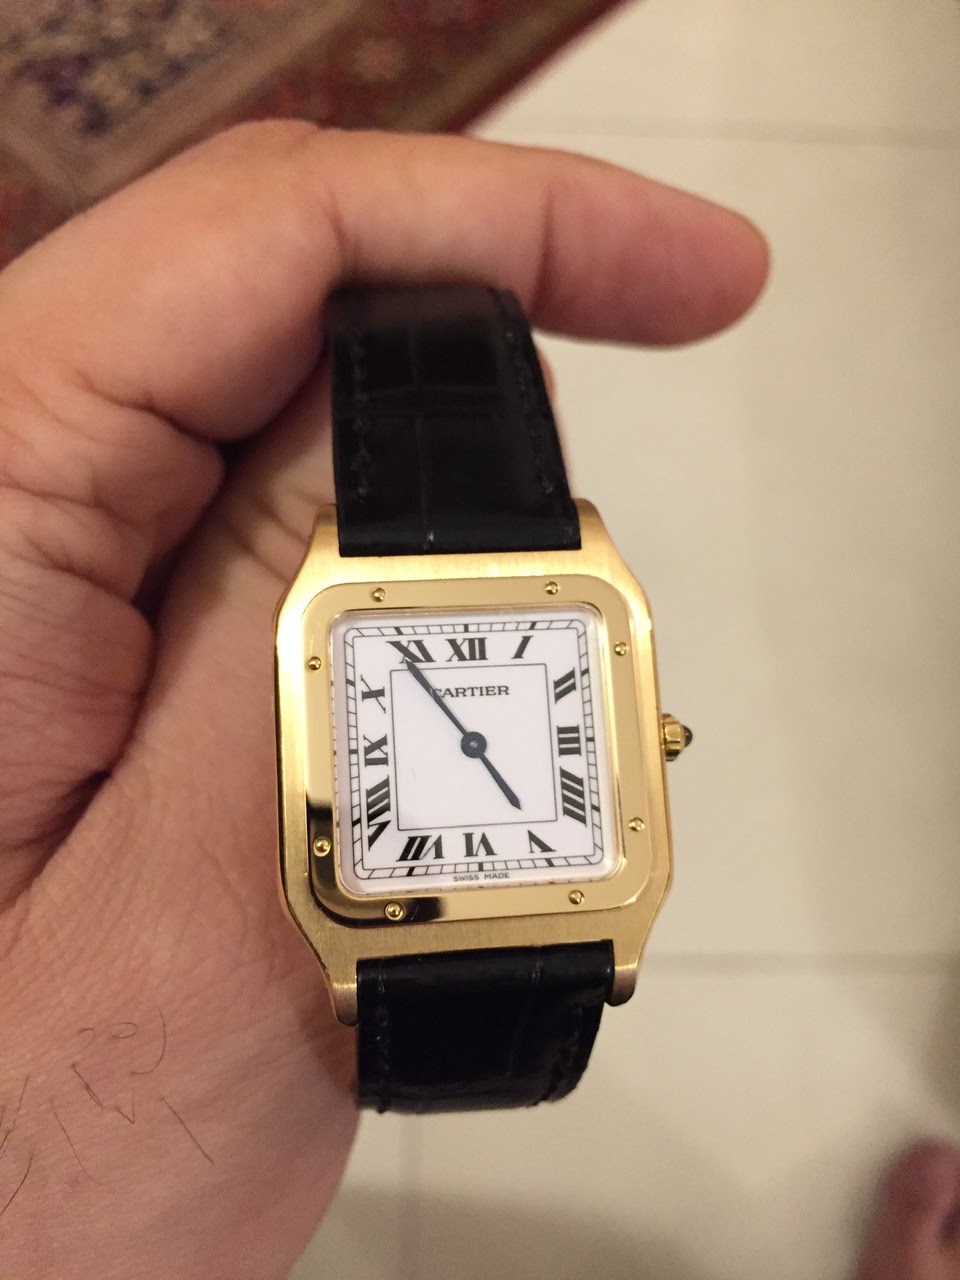 Cartier - Few months ago I bought the 